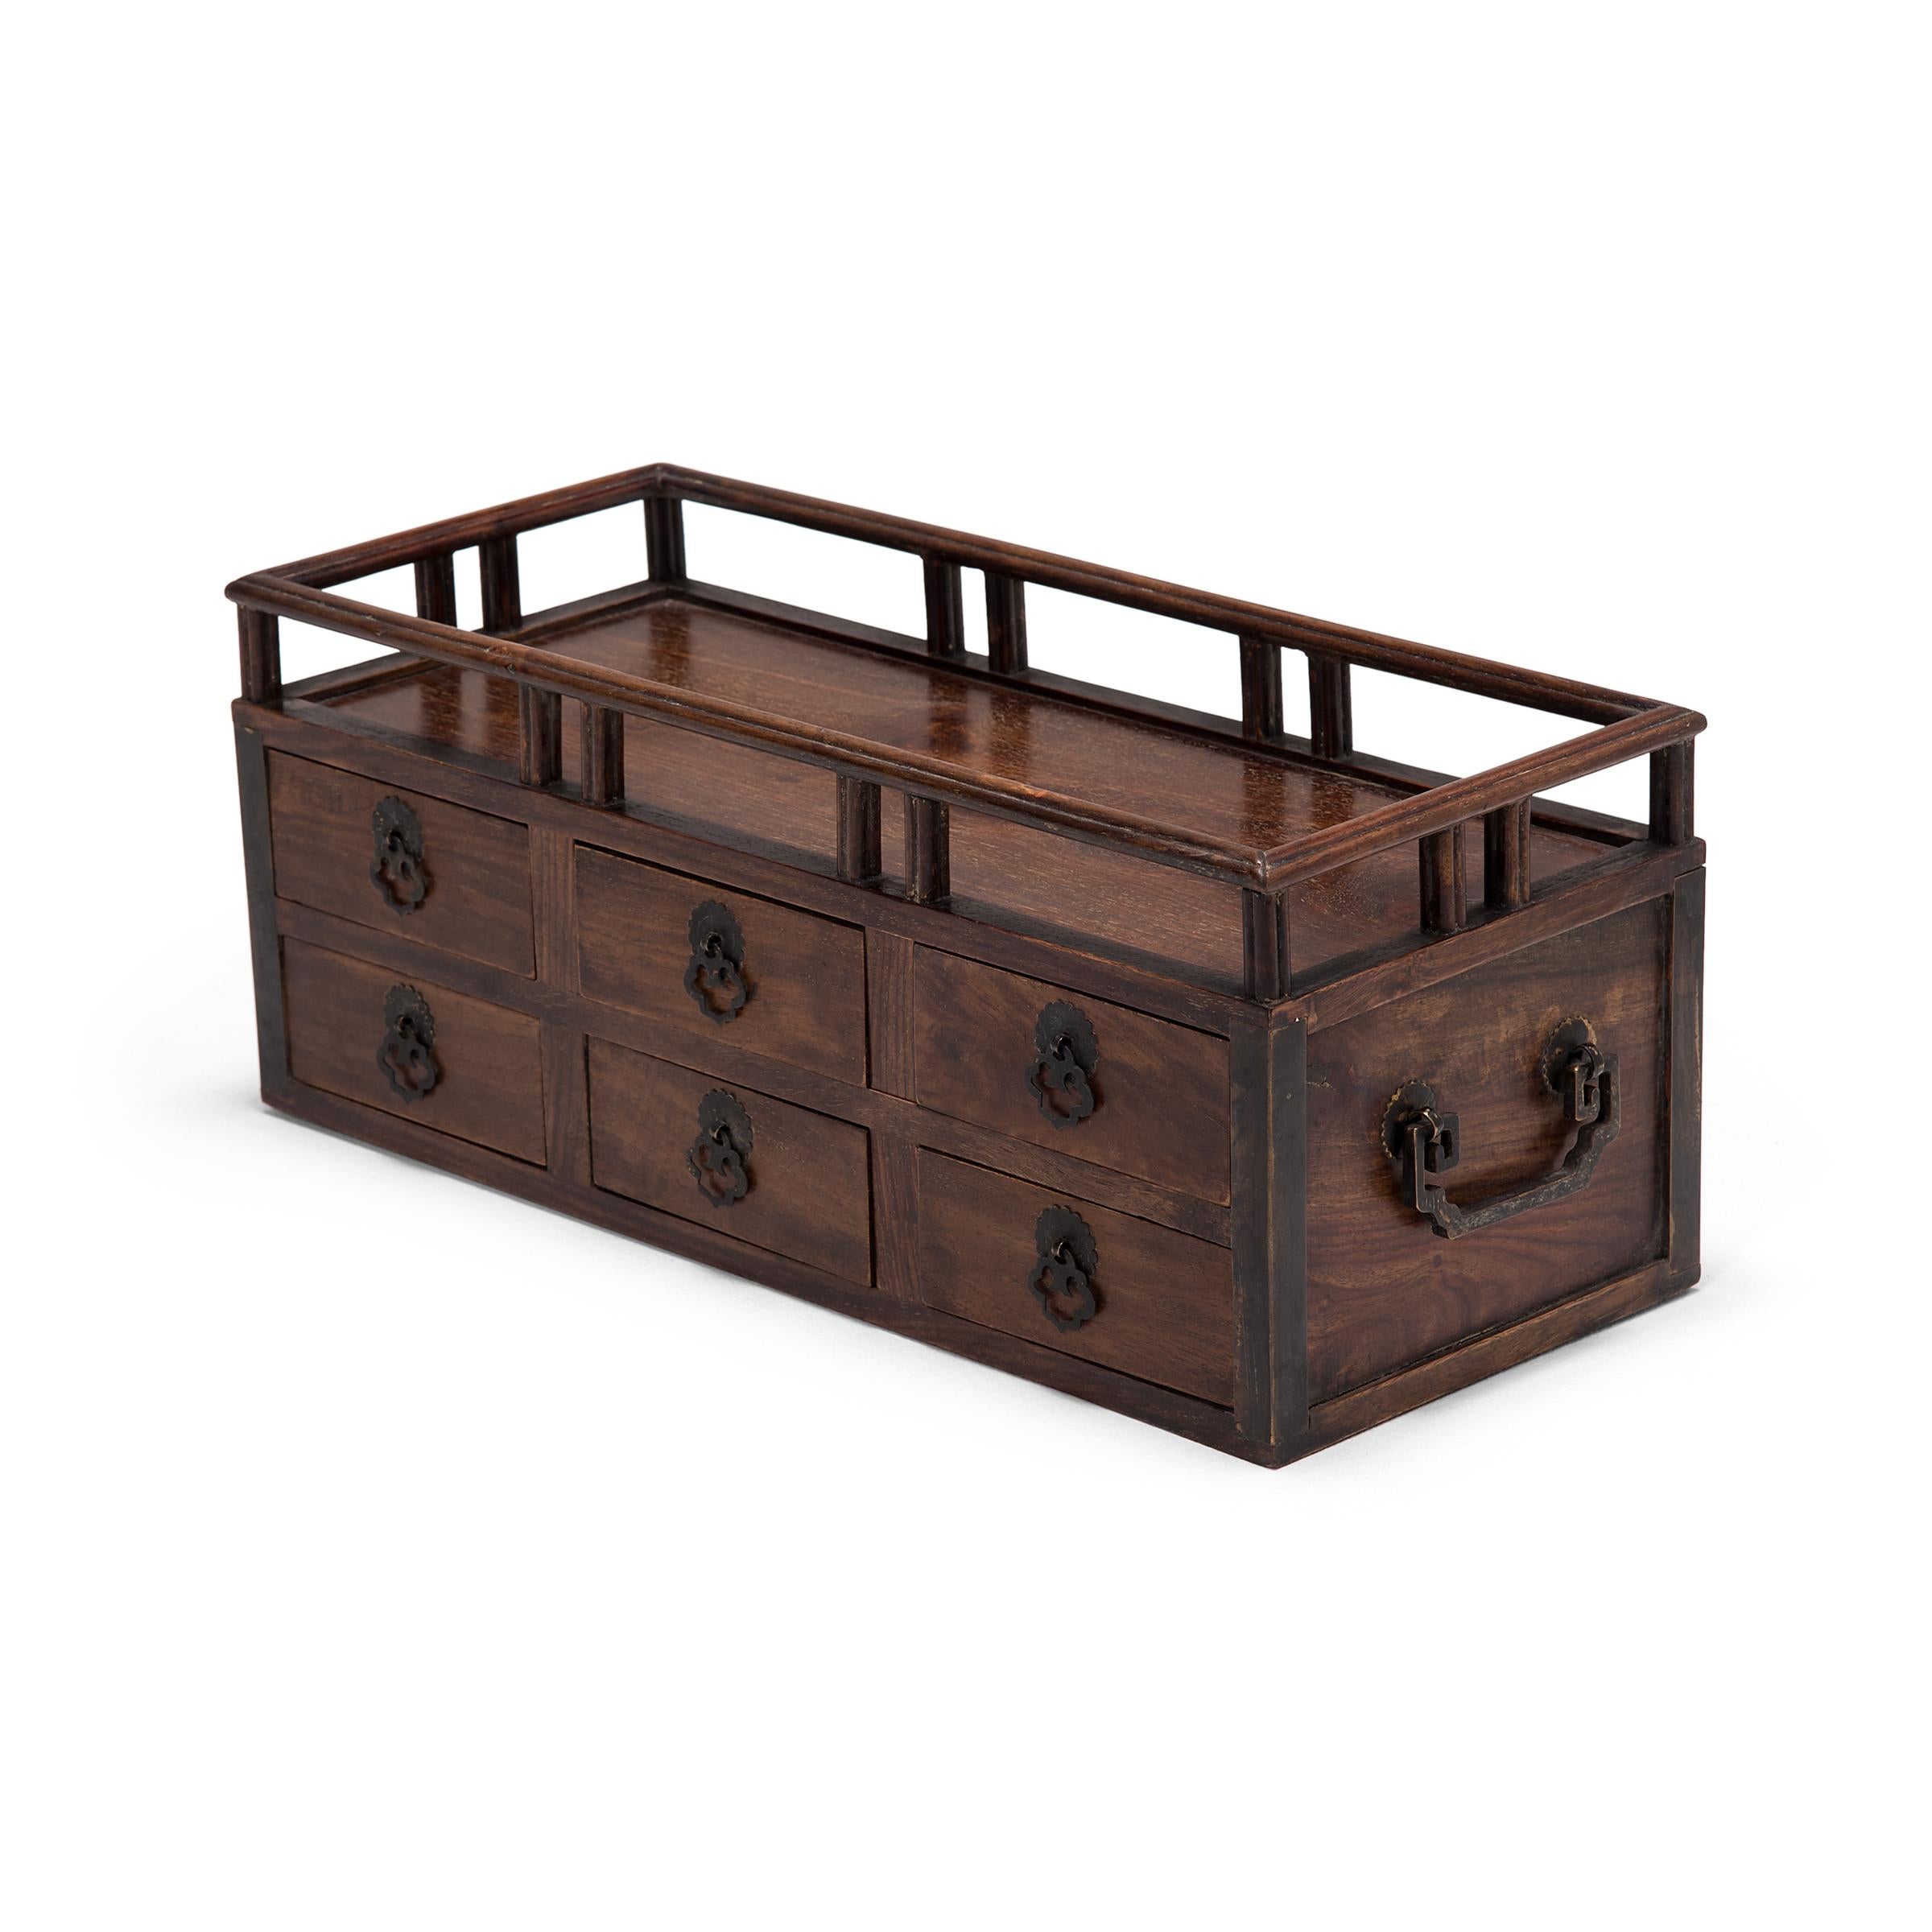 Crafted of fine rosewood, this early 20th century scholars' chest is an example of the multifunctional boxes used tabletop in lieu of a chest of drawers. While some were used to store cosmetics, jewelry, documents, and other accessories, the small